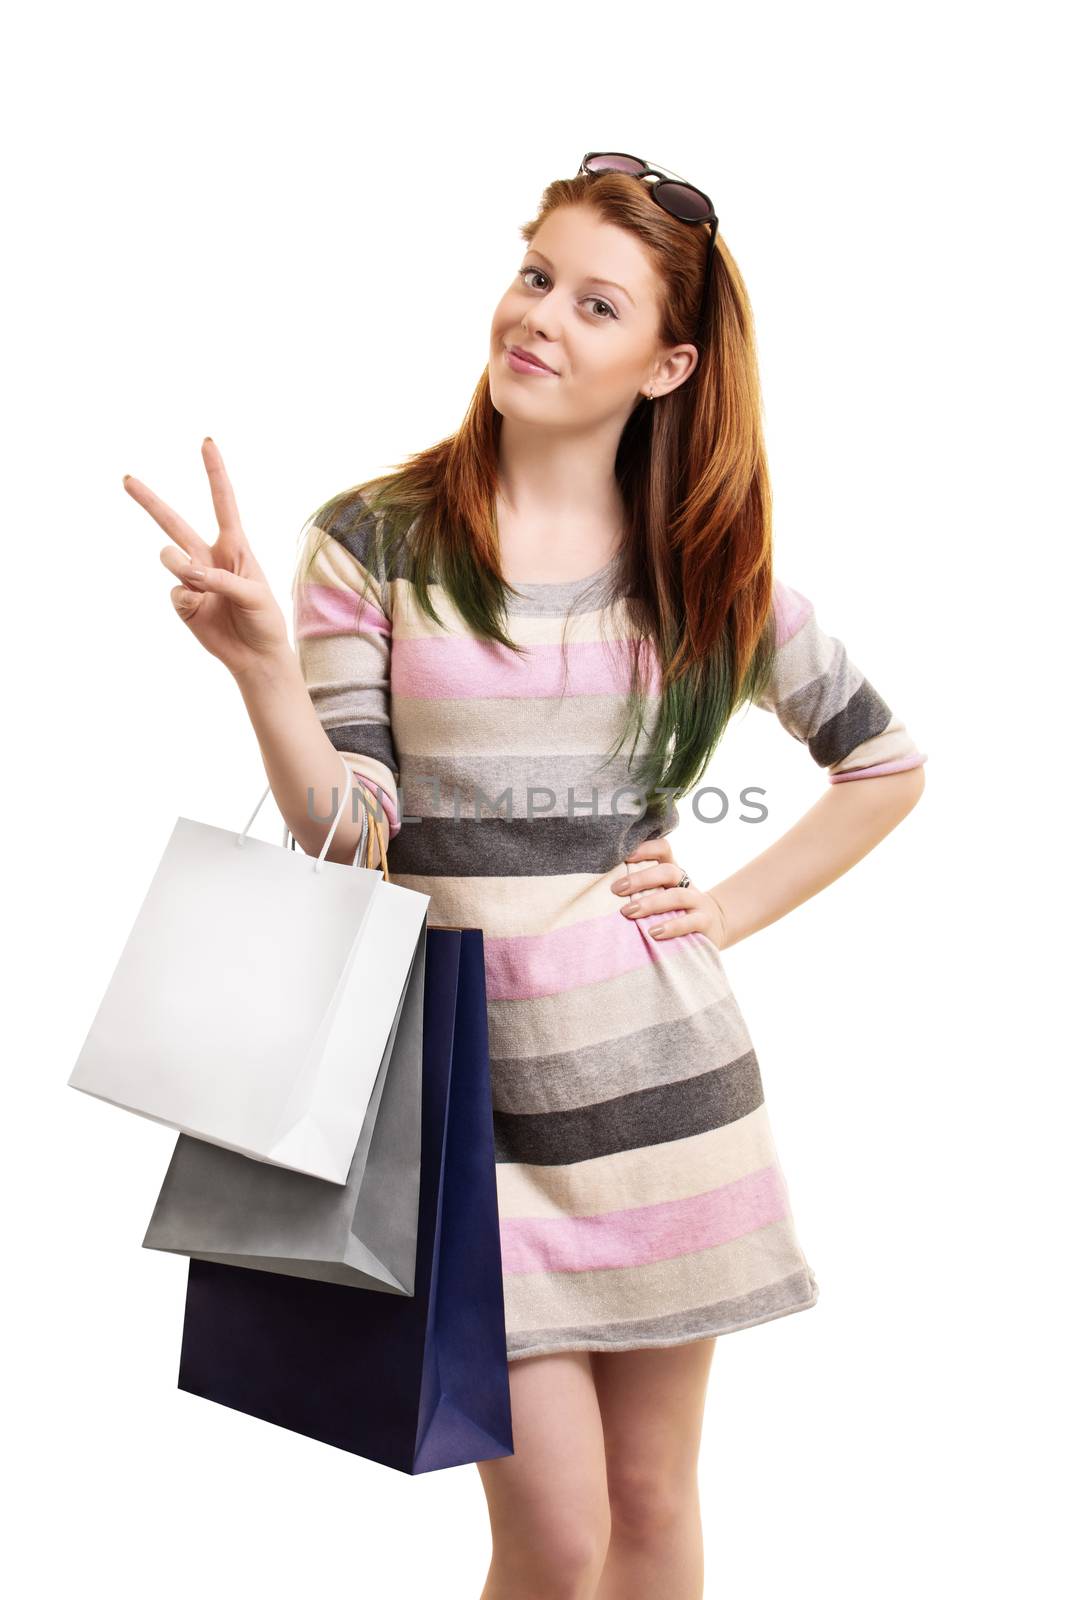 Young girl gone shopping by Mendelex